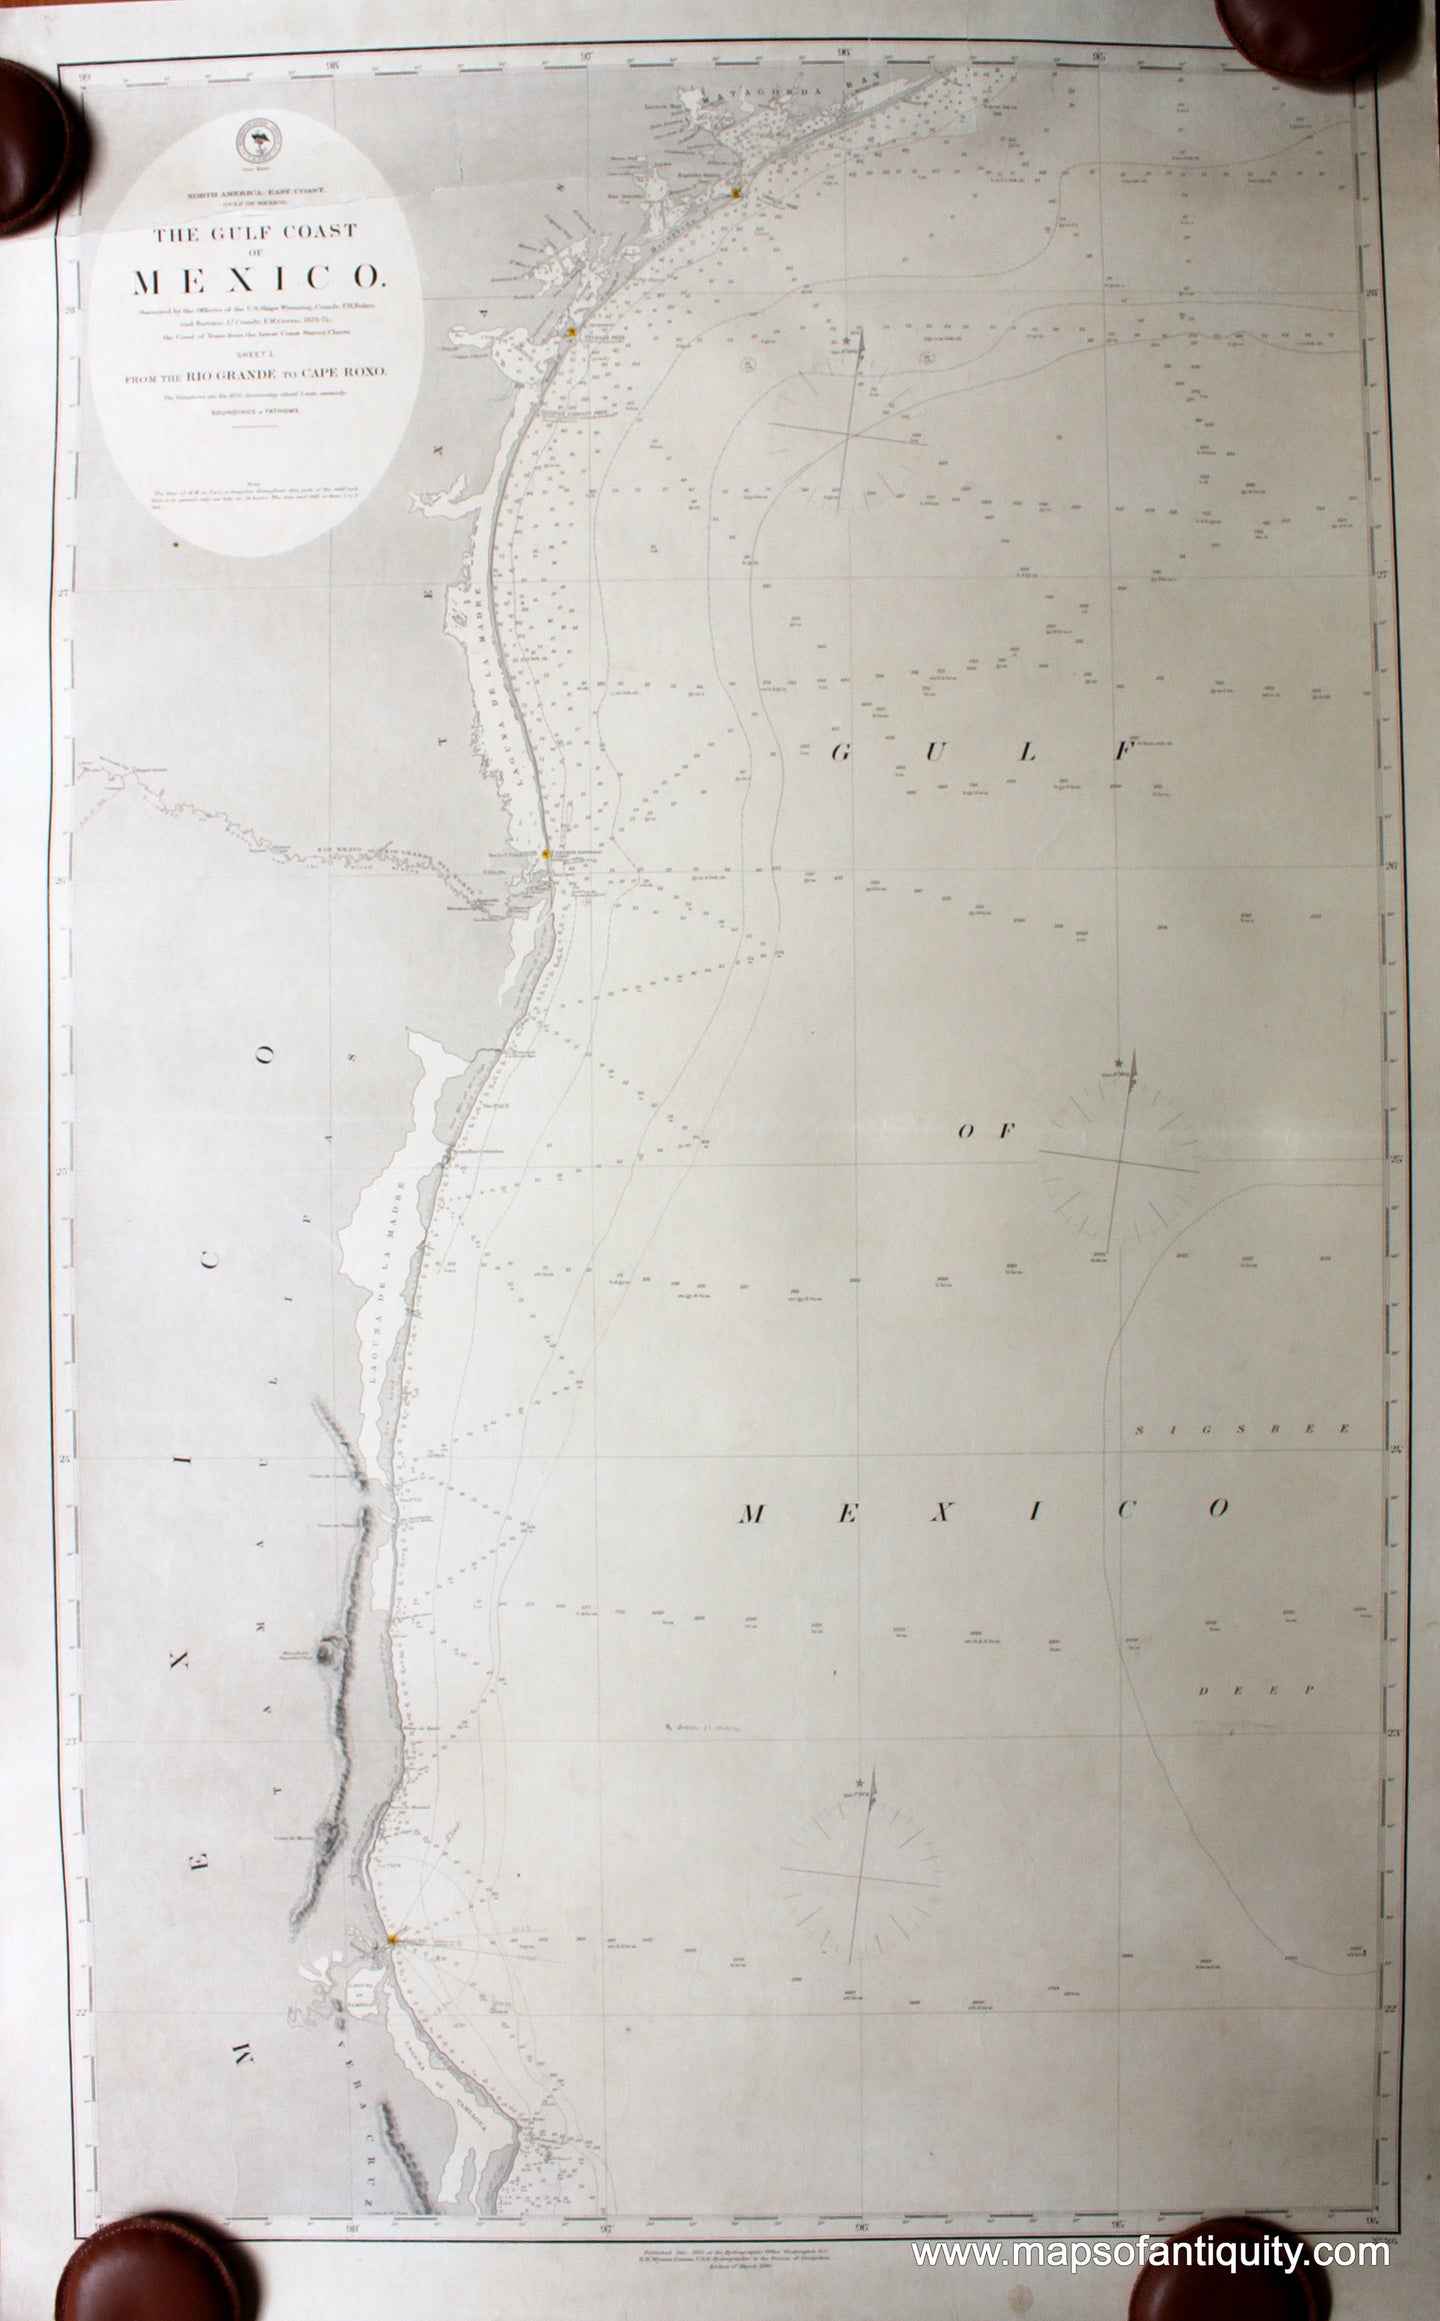 Antique-Black-and-White-Nautical-Chart-The-Gulf-Coast-of-Mexico-from-Rio-Grande-to-Cape-Roxo-Nautical-Charts-US--South-Charts-1890-Hydrographic-Dept.-US-Navy-Maps-Of-Antiquity